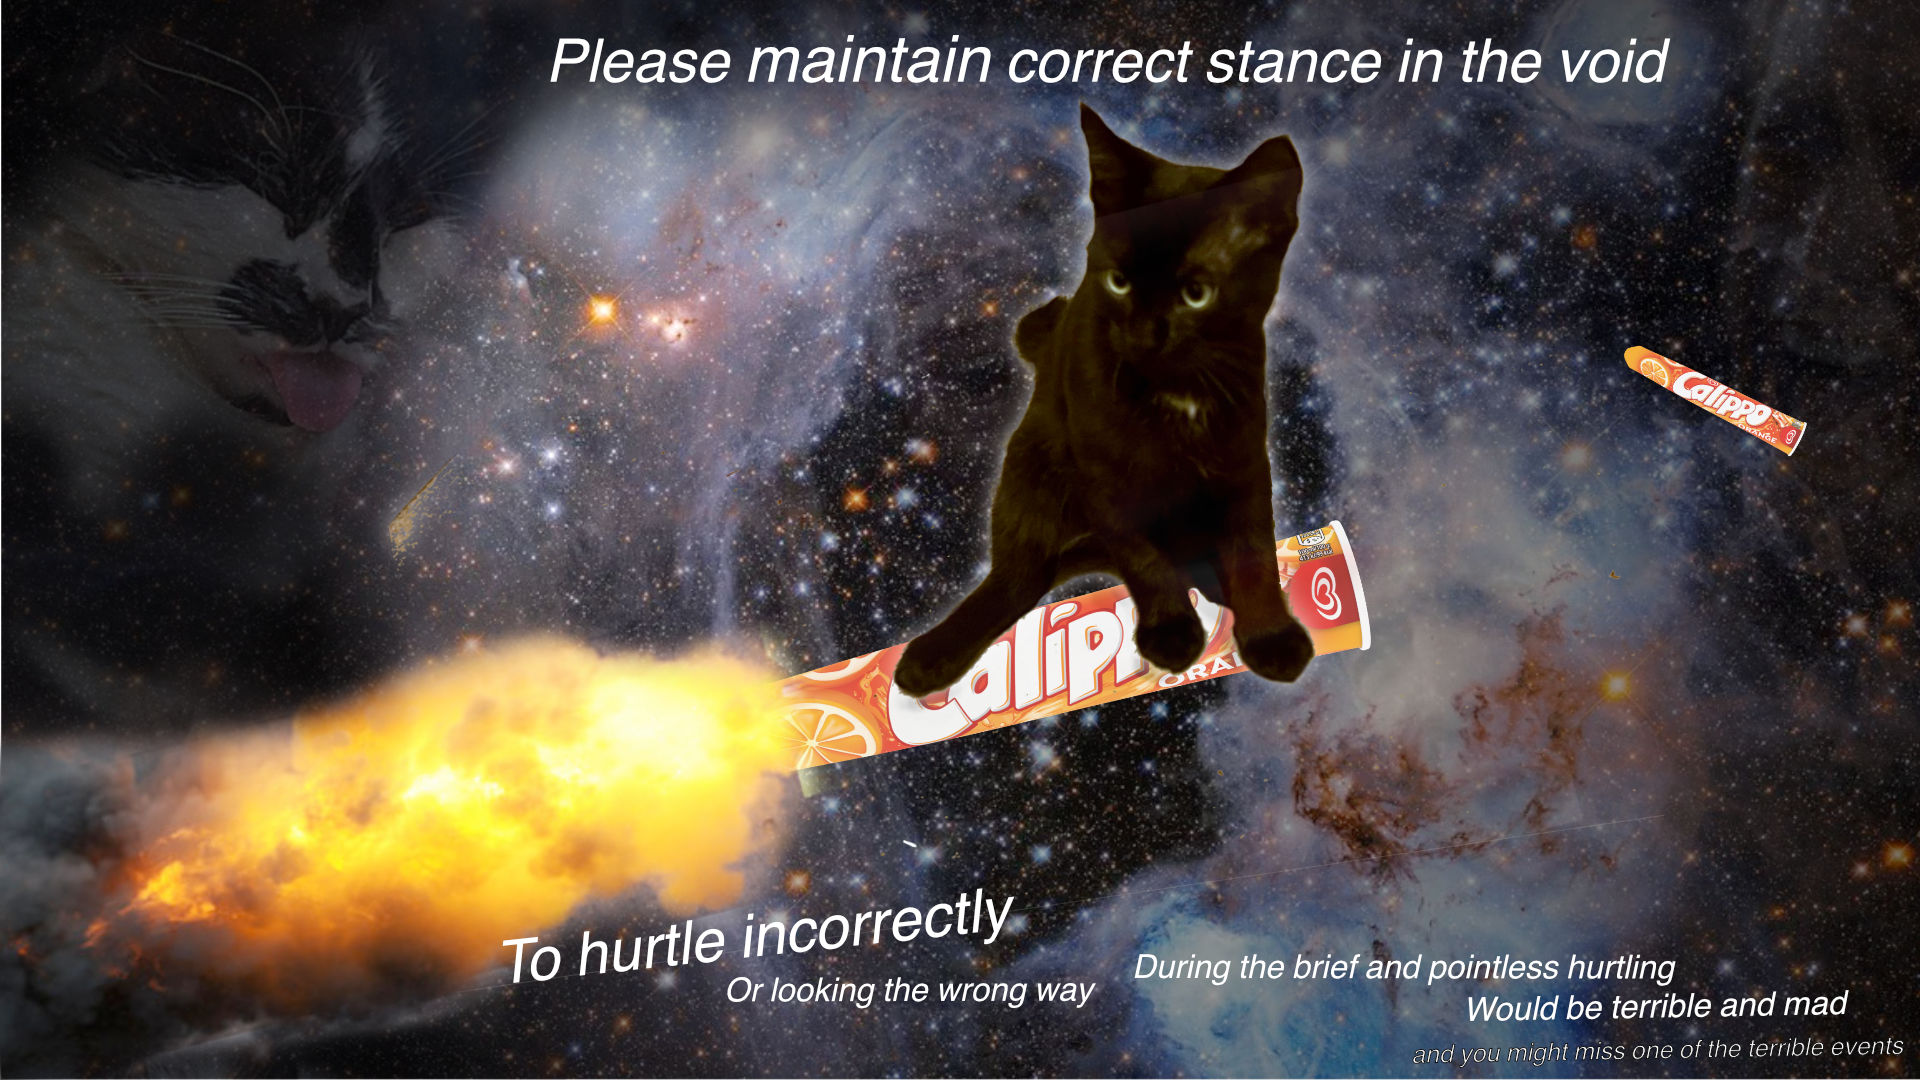 Very good cat rides on calippo through space, prepared for any eventuality. Various bits of the cosmos seem to remsemble Nic Cage screaming or looking depressed for some reason.